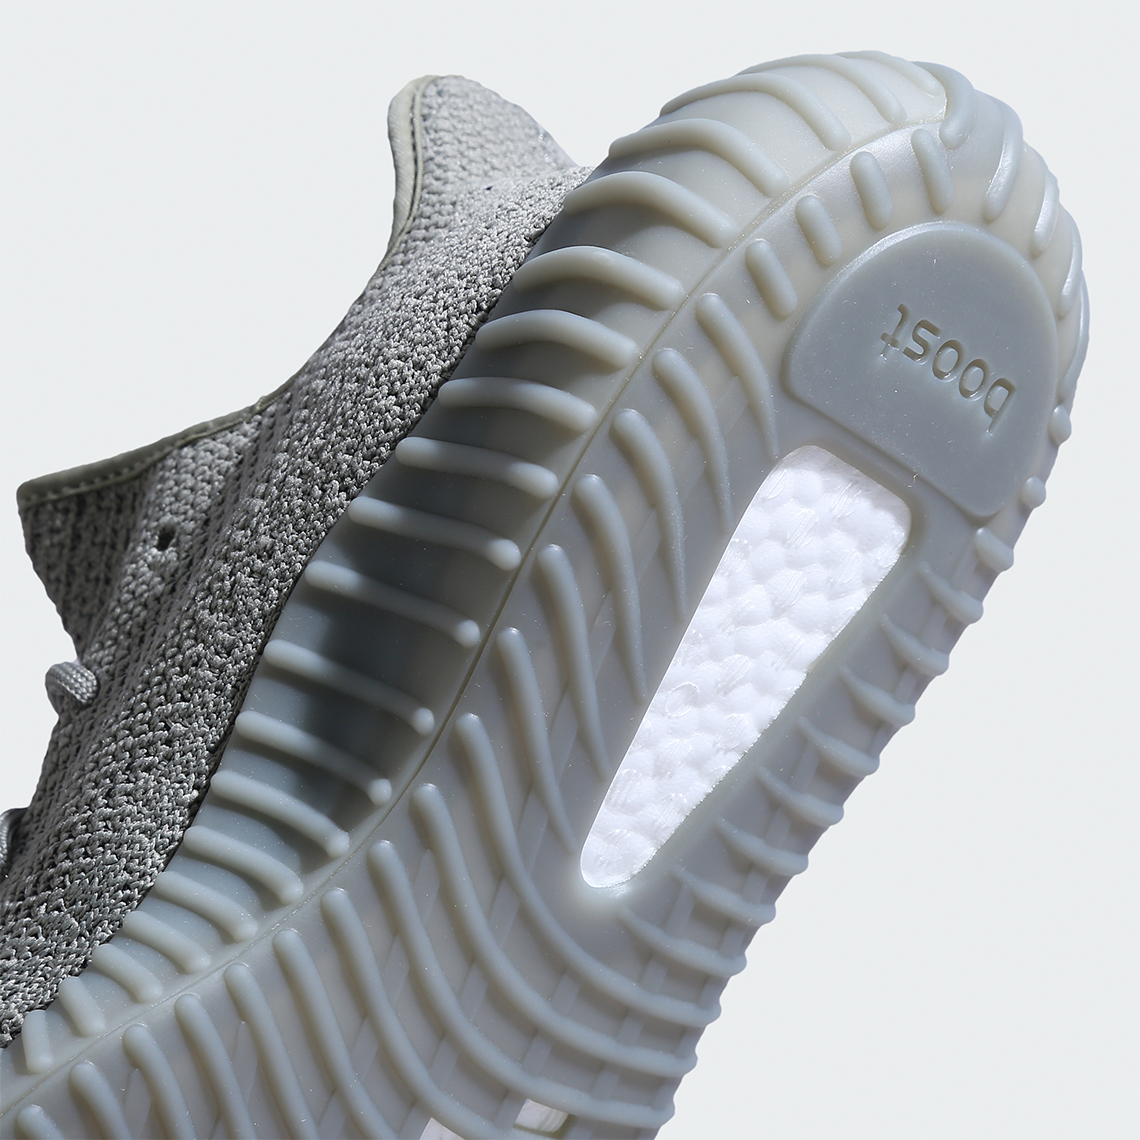 adidas yeezy boost 350 v2 granite hq2059 release date 1